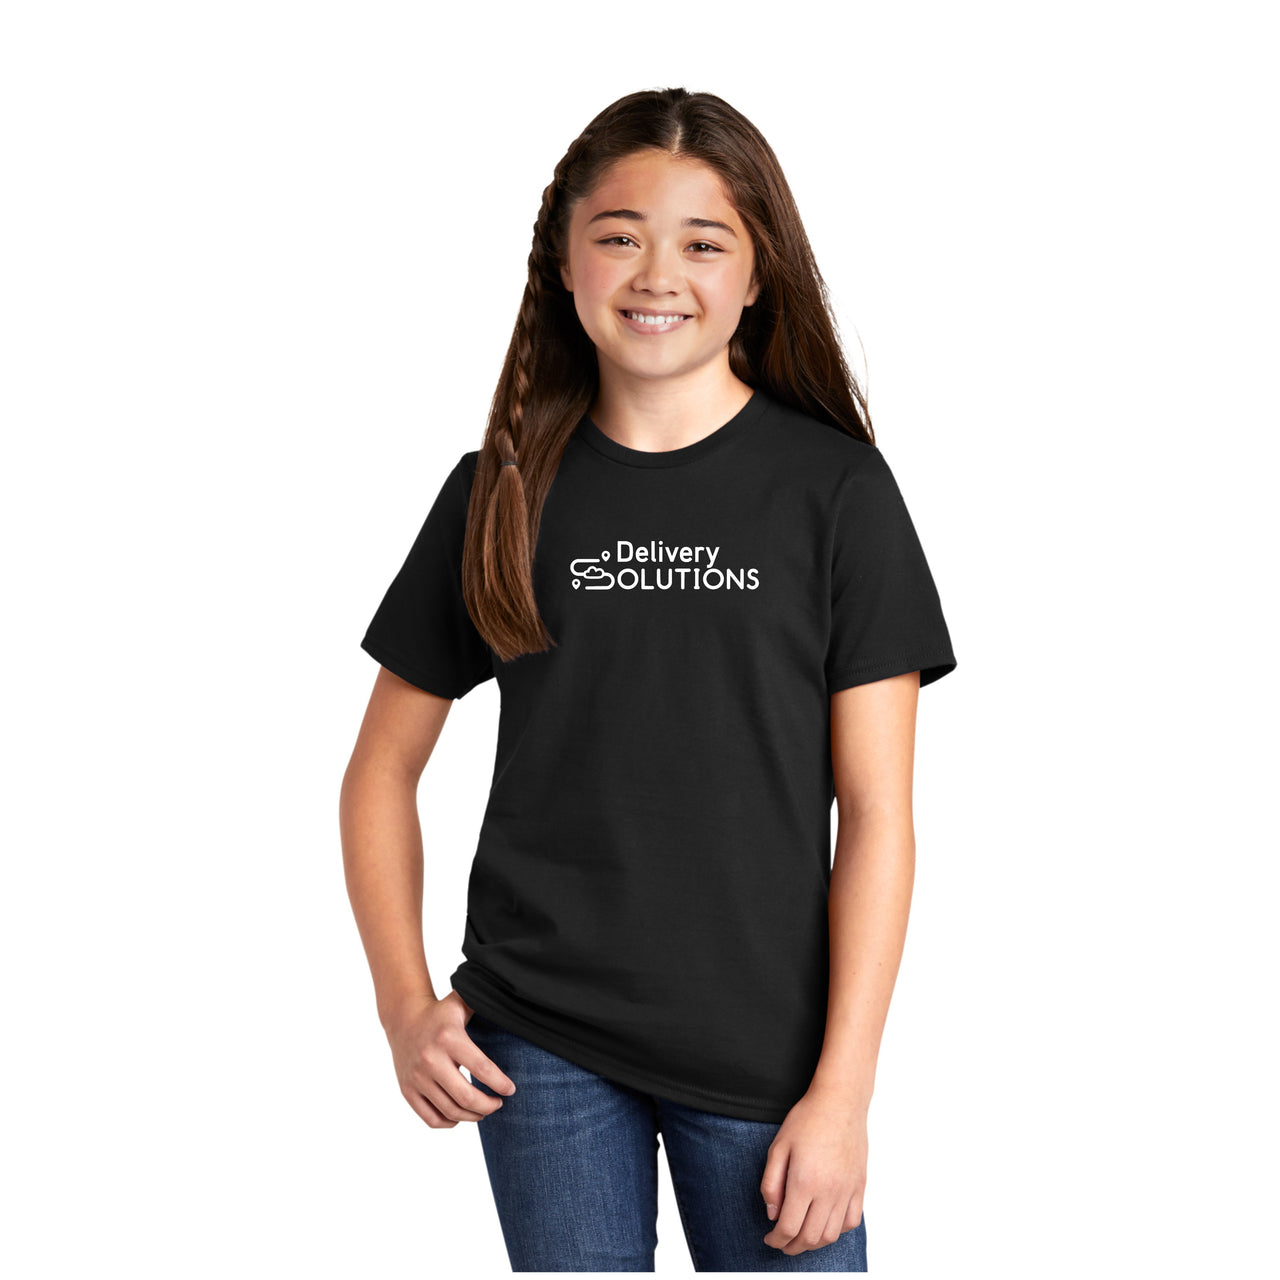 Youth - Unisex Tee - District (Delivery Solutions)